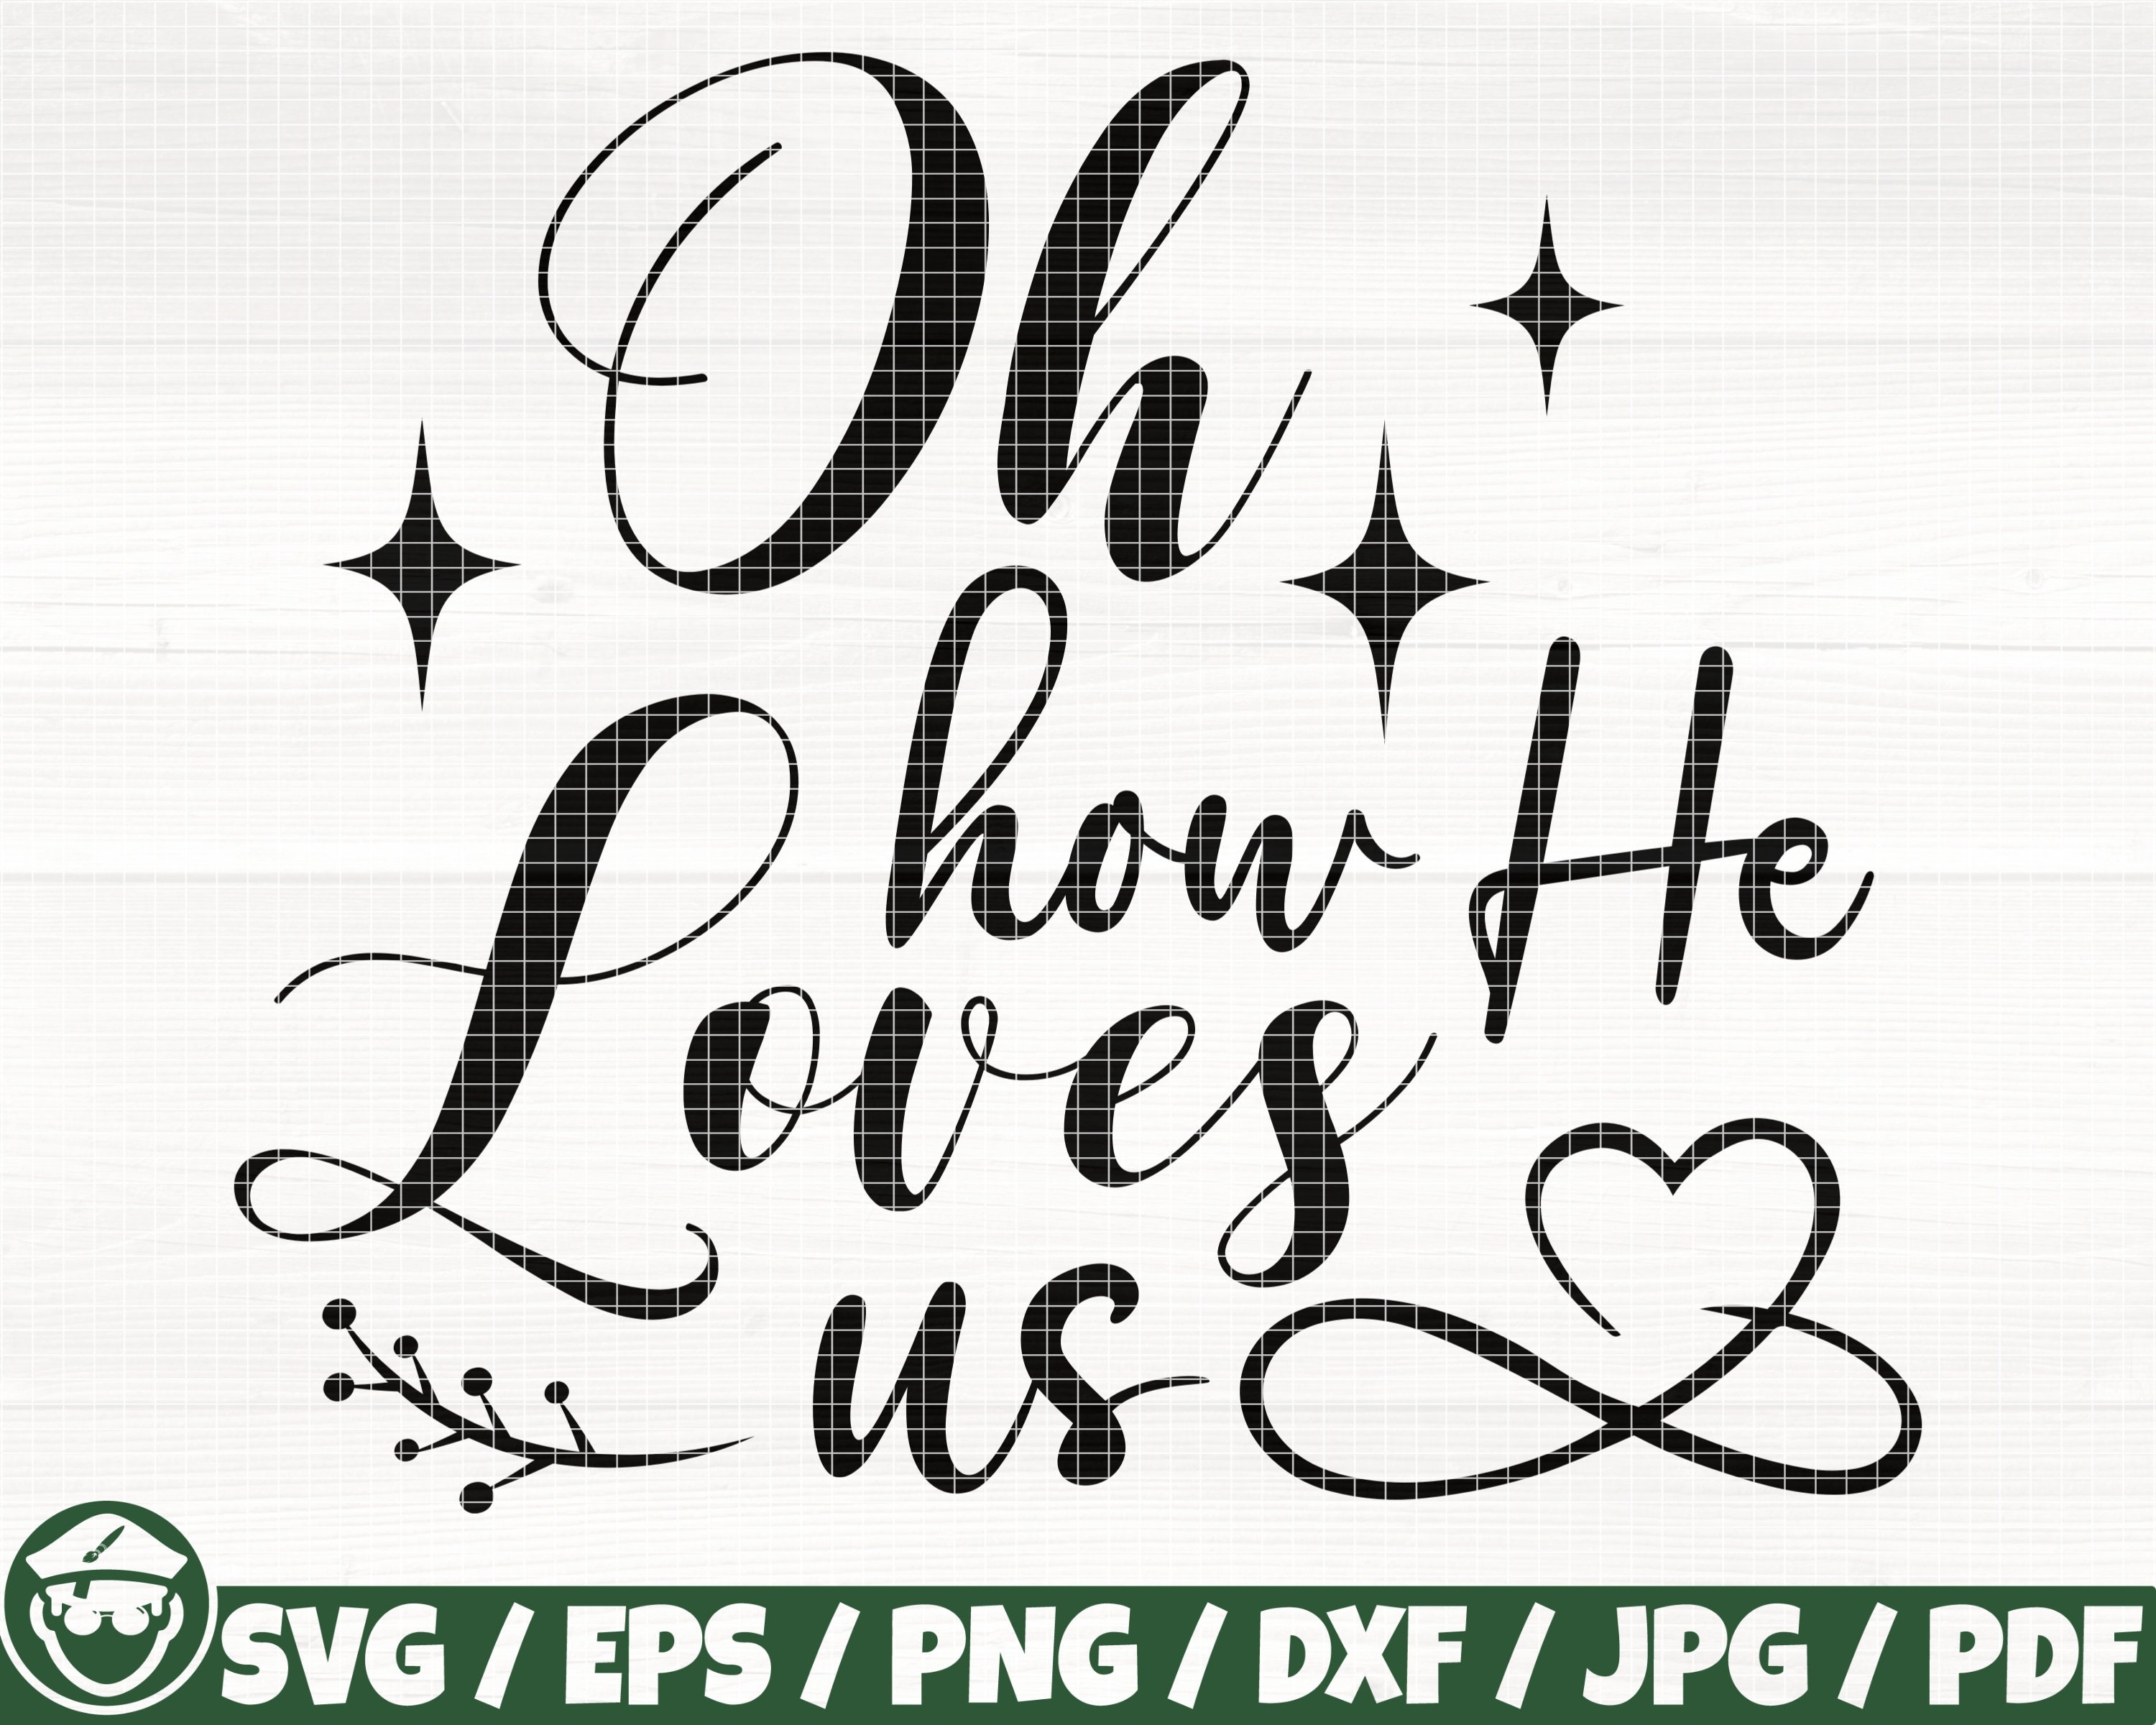 Oh how he loves us Royalty Free Vector Image - VectorStock